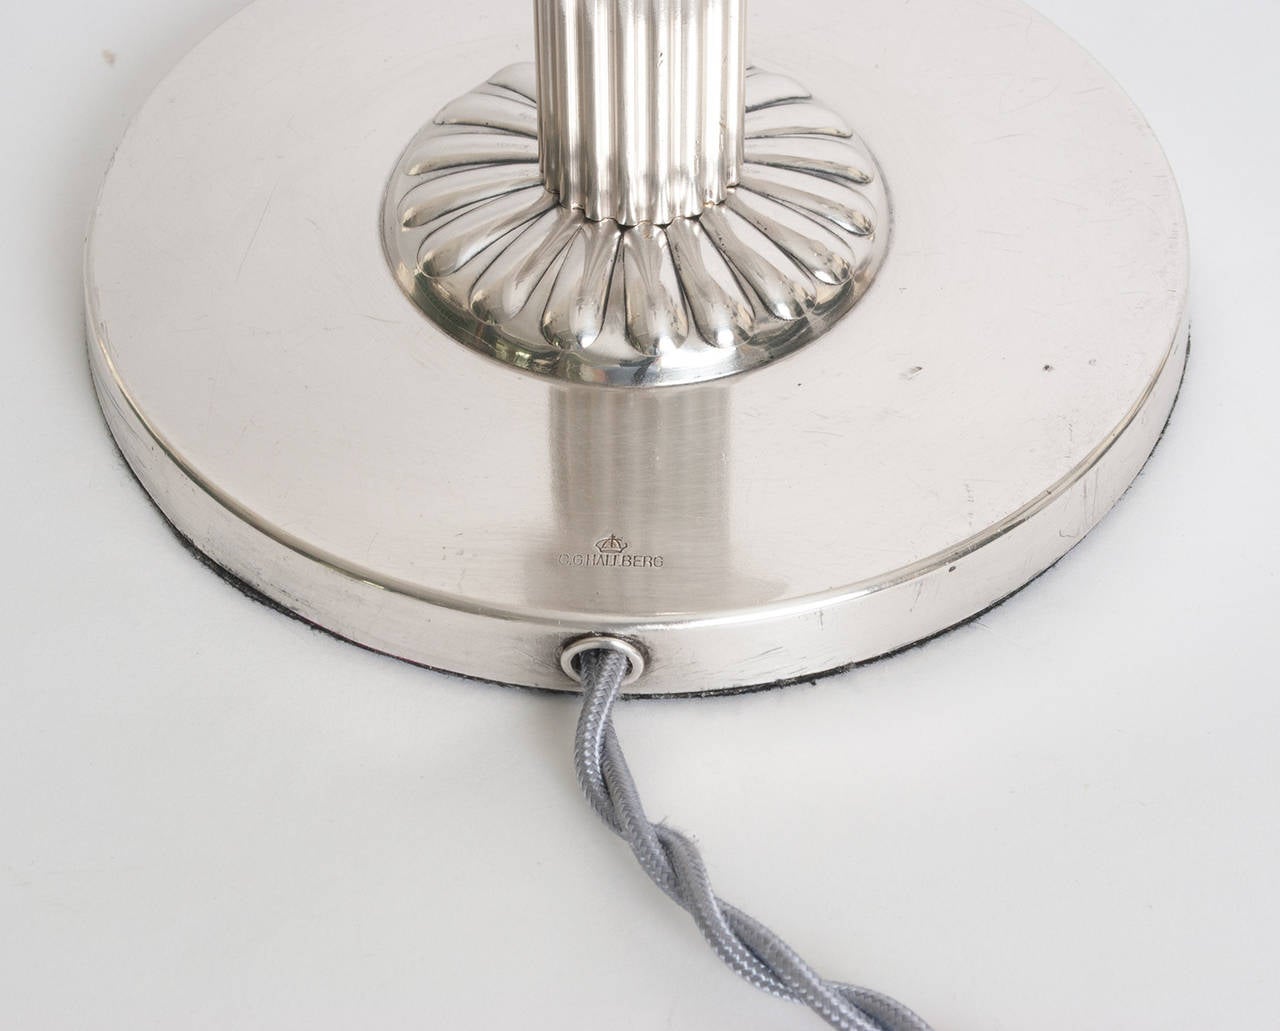 Silvered Swedish Art Deco Silver Plated Lamp by Elis Bergh for C.G. Hallberg